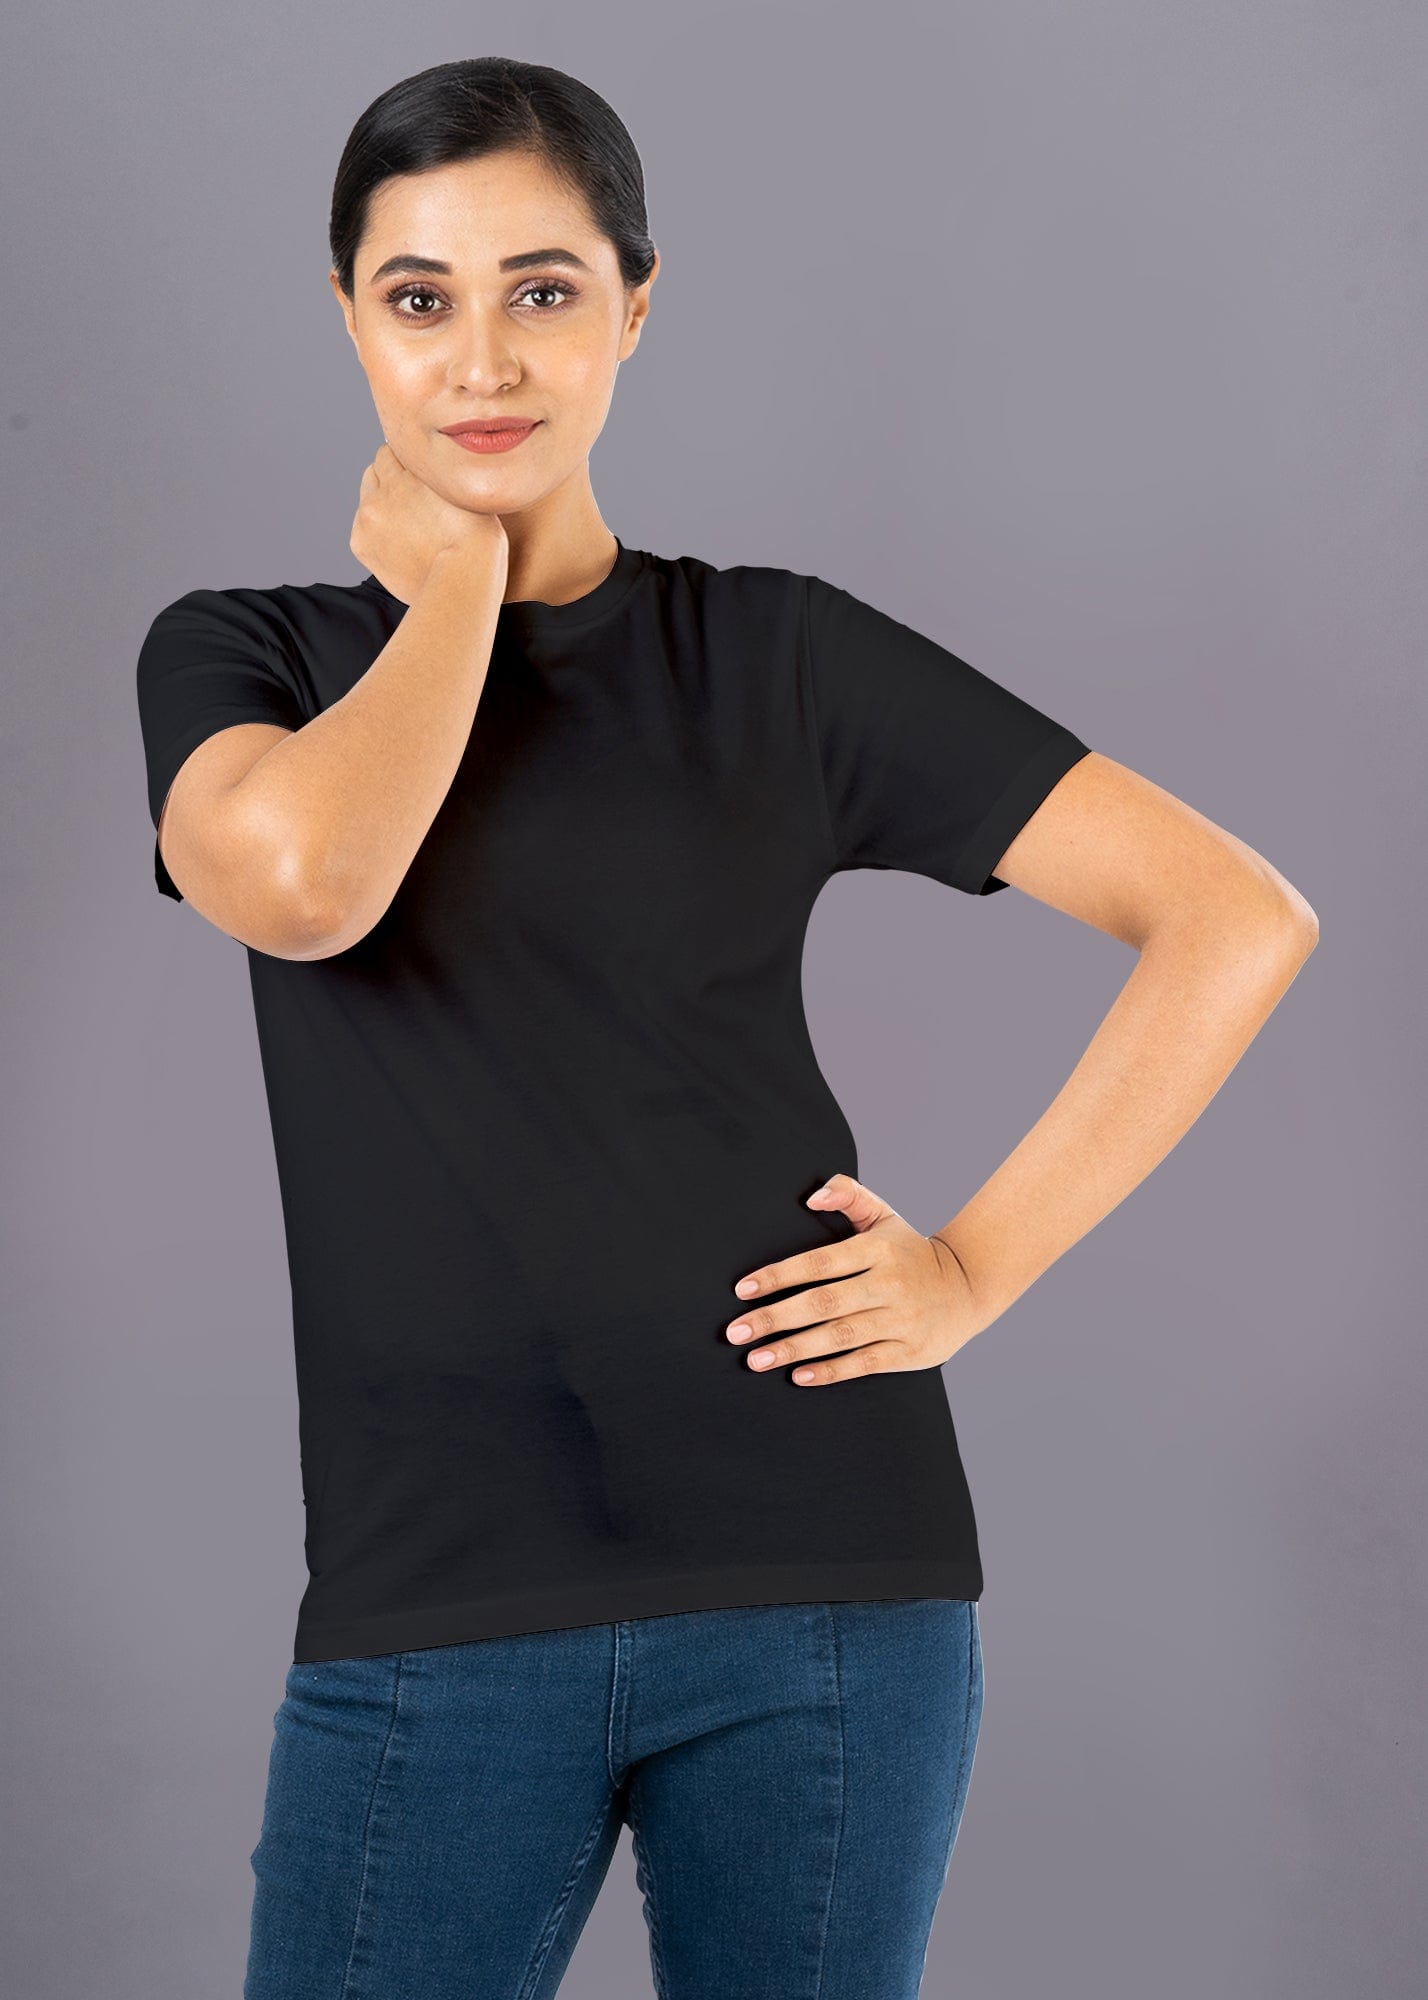 Solid Half Sleeve Premium Cotton Regular Fit T-Shirt For Women - Pack Of 3